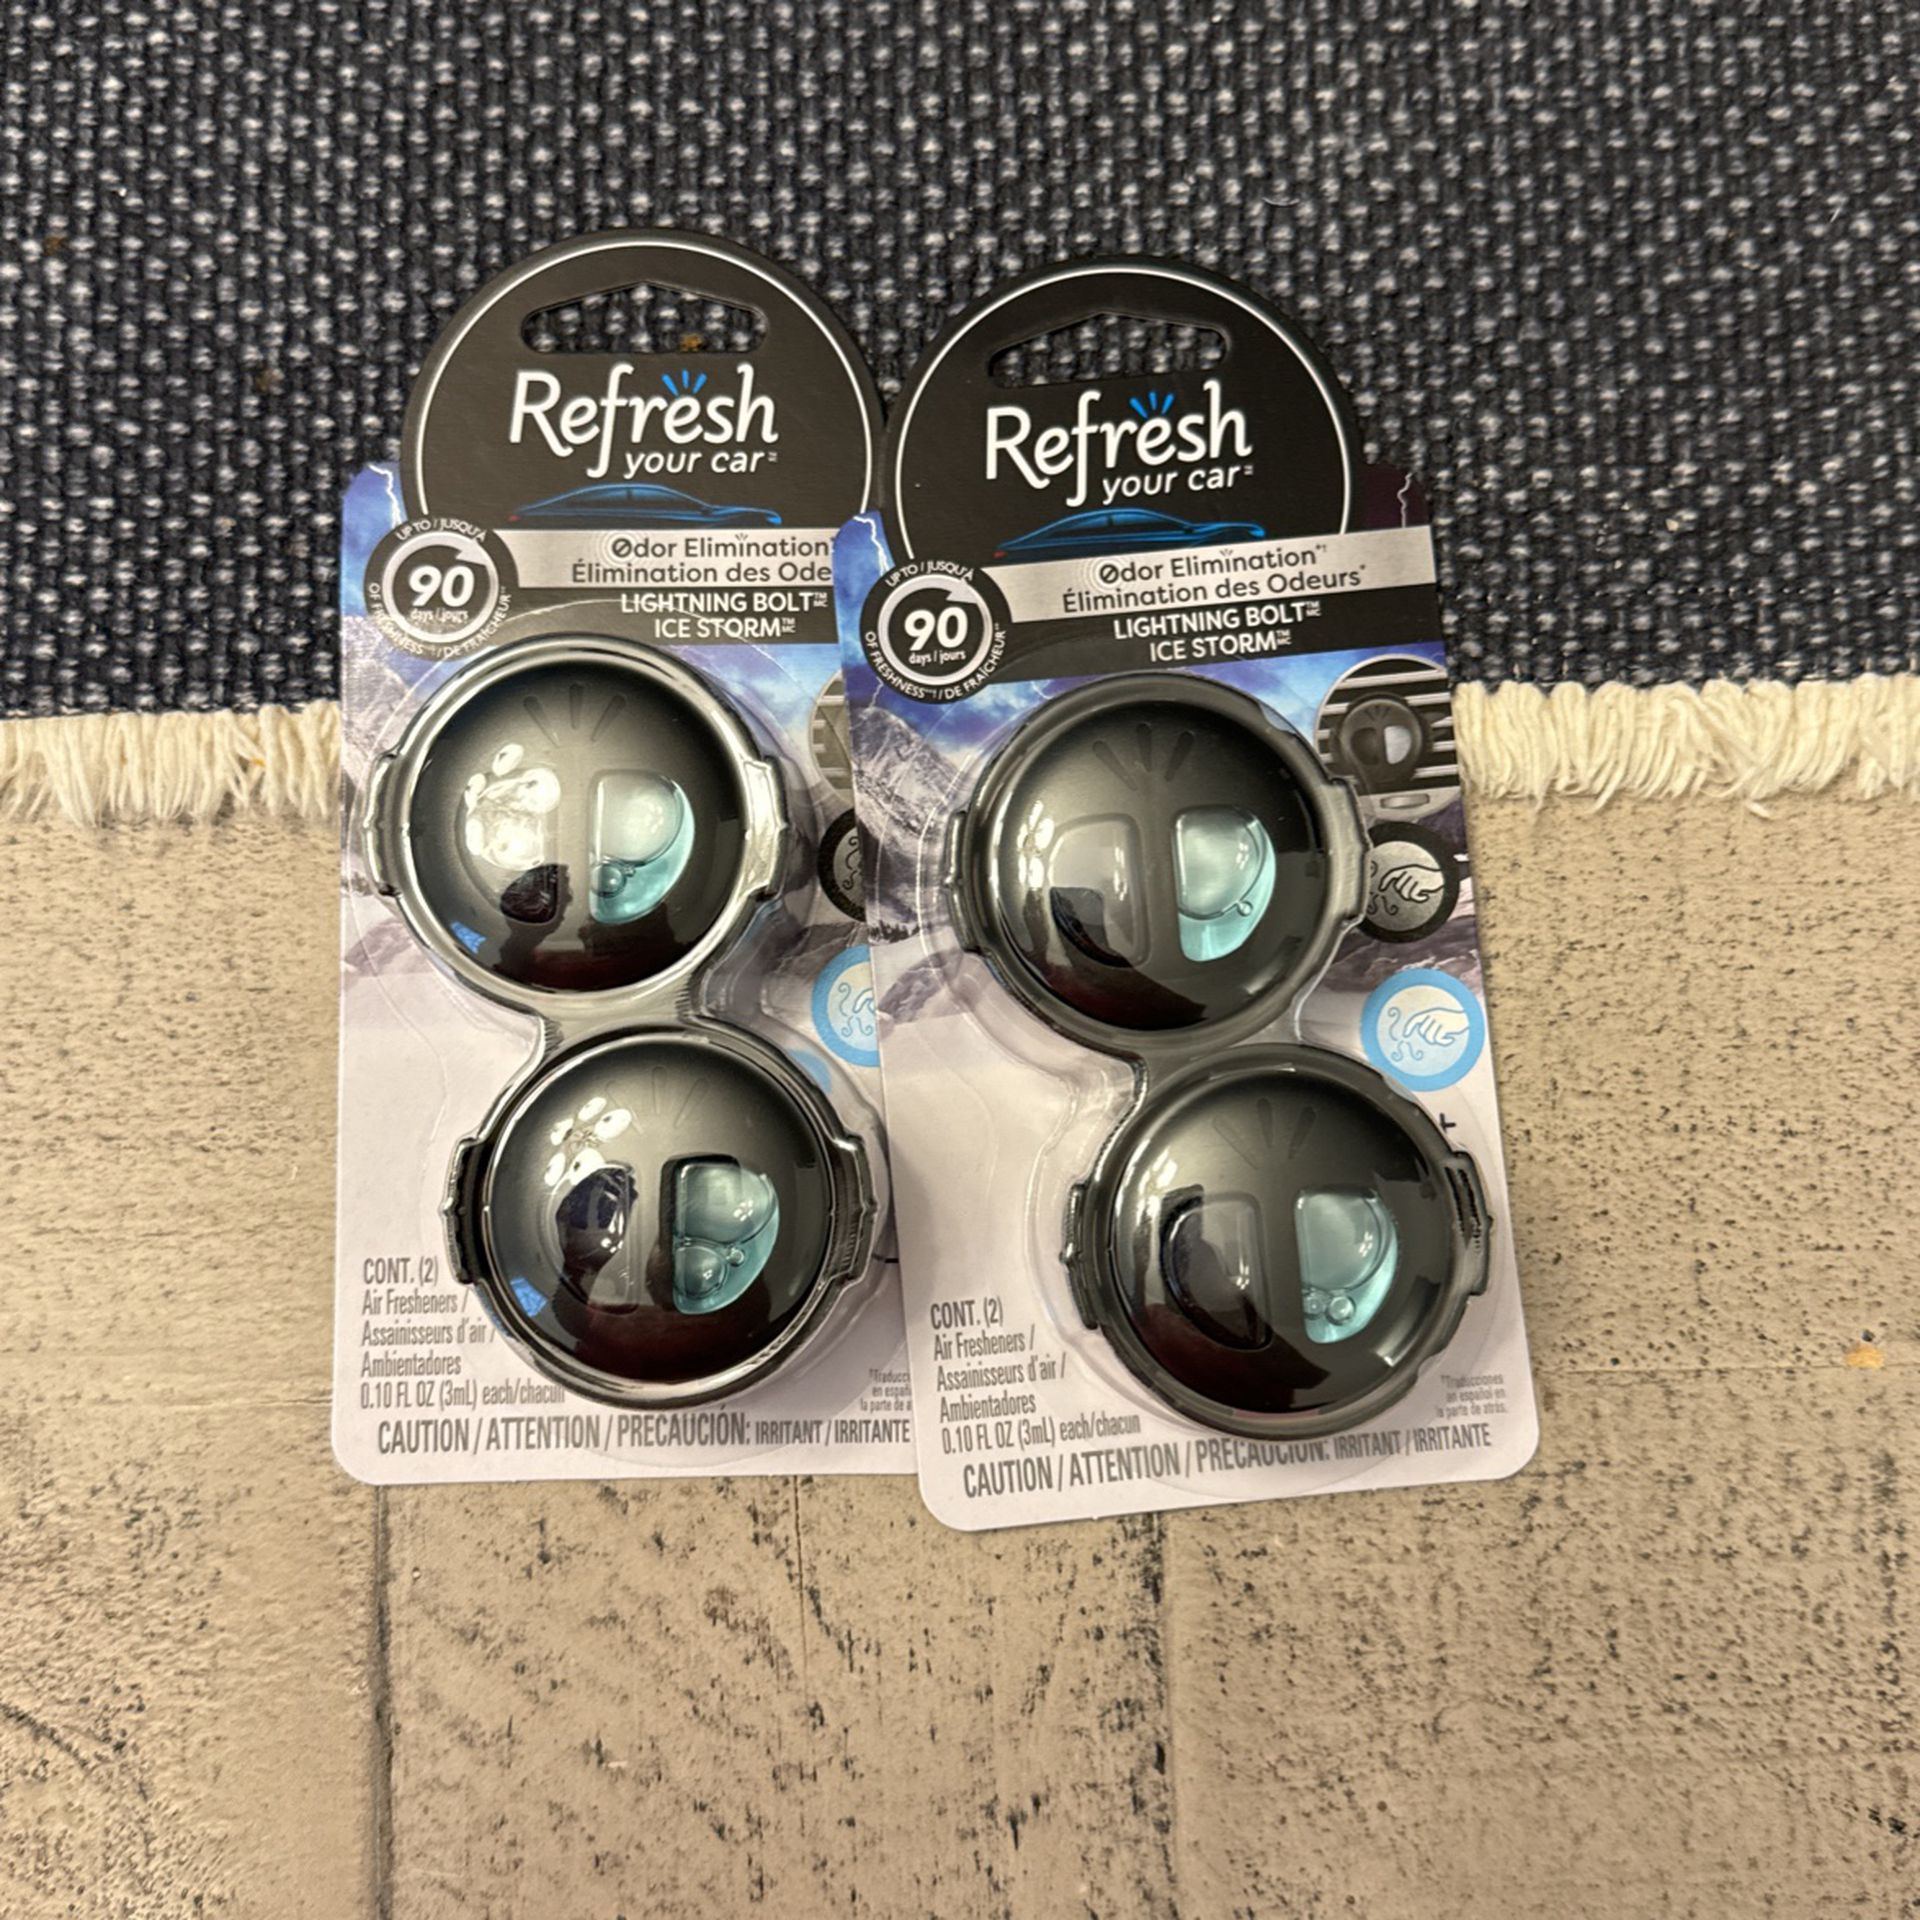 2 - Refresh Your Car Mini Diffuser Air Freshener (Lightning Bolt/Ice Storm Scent, 2 Pack)